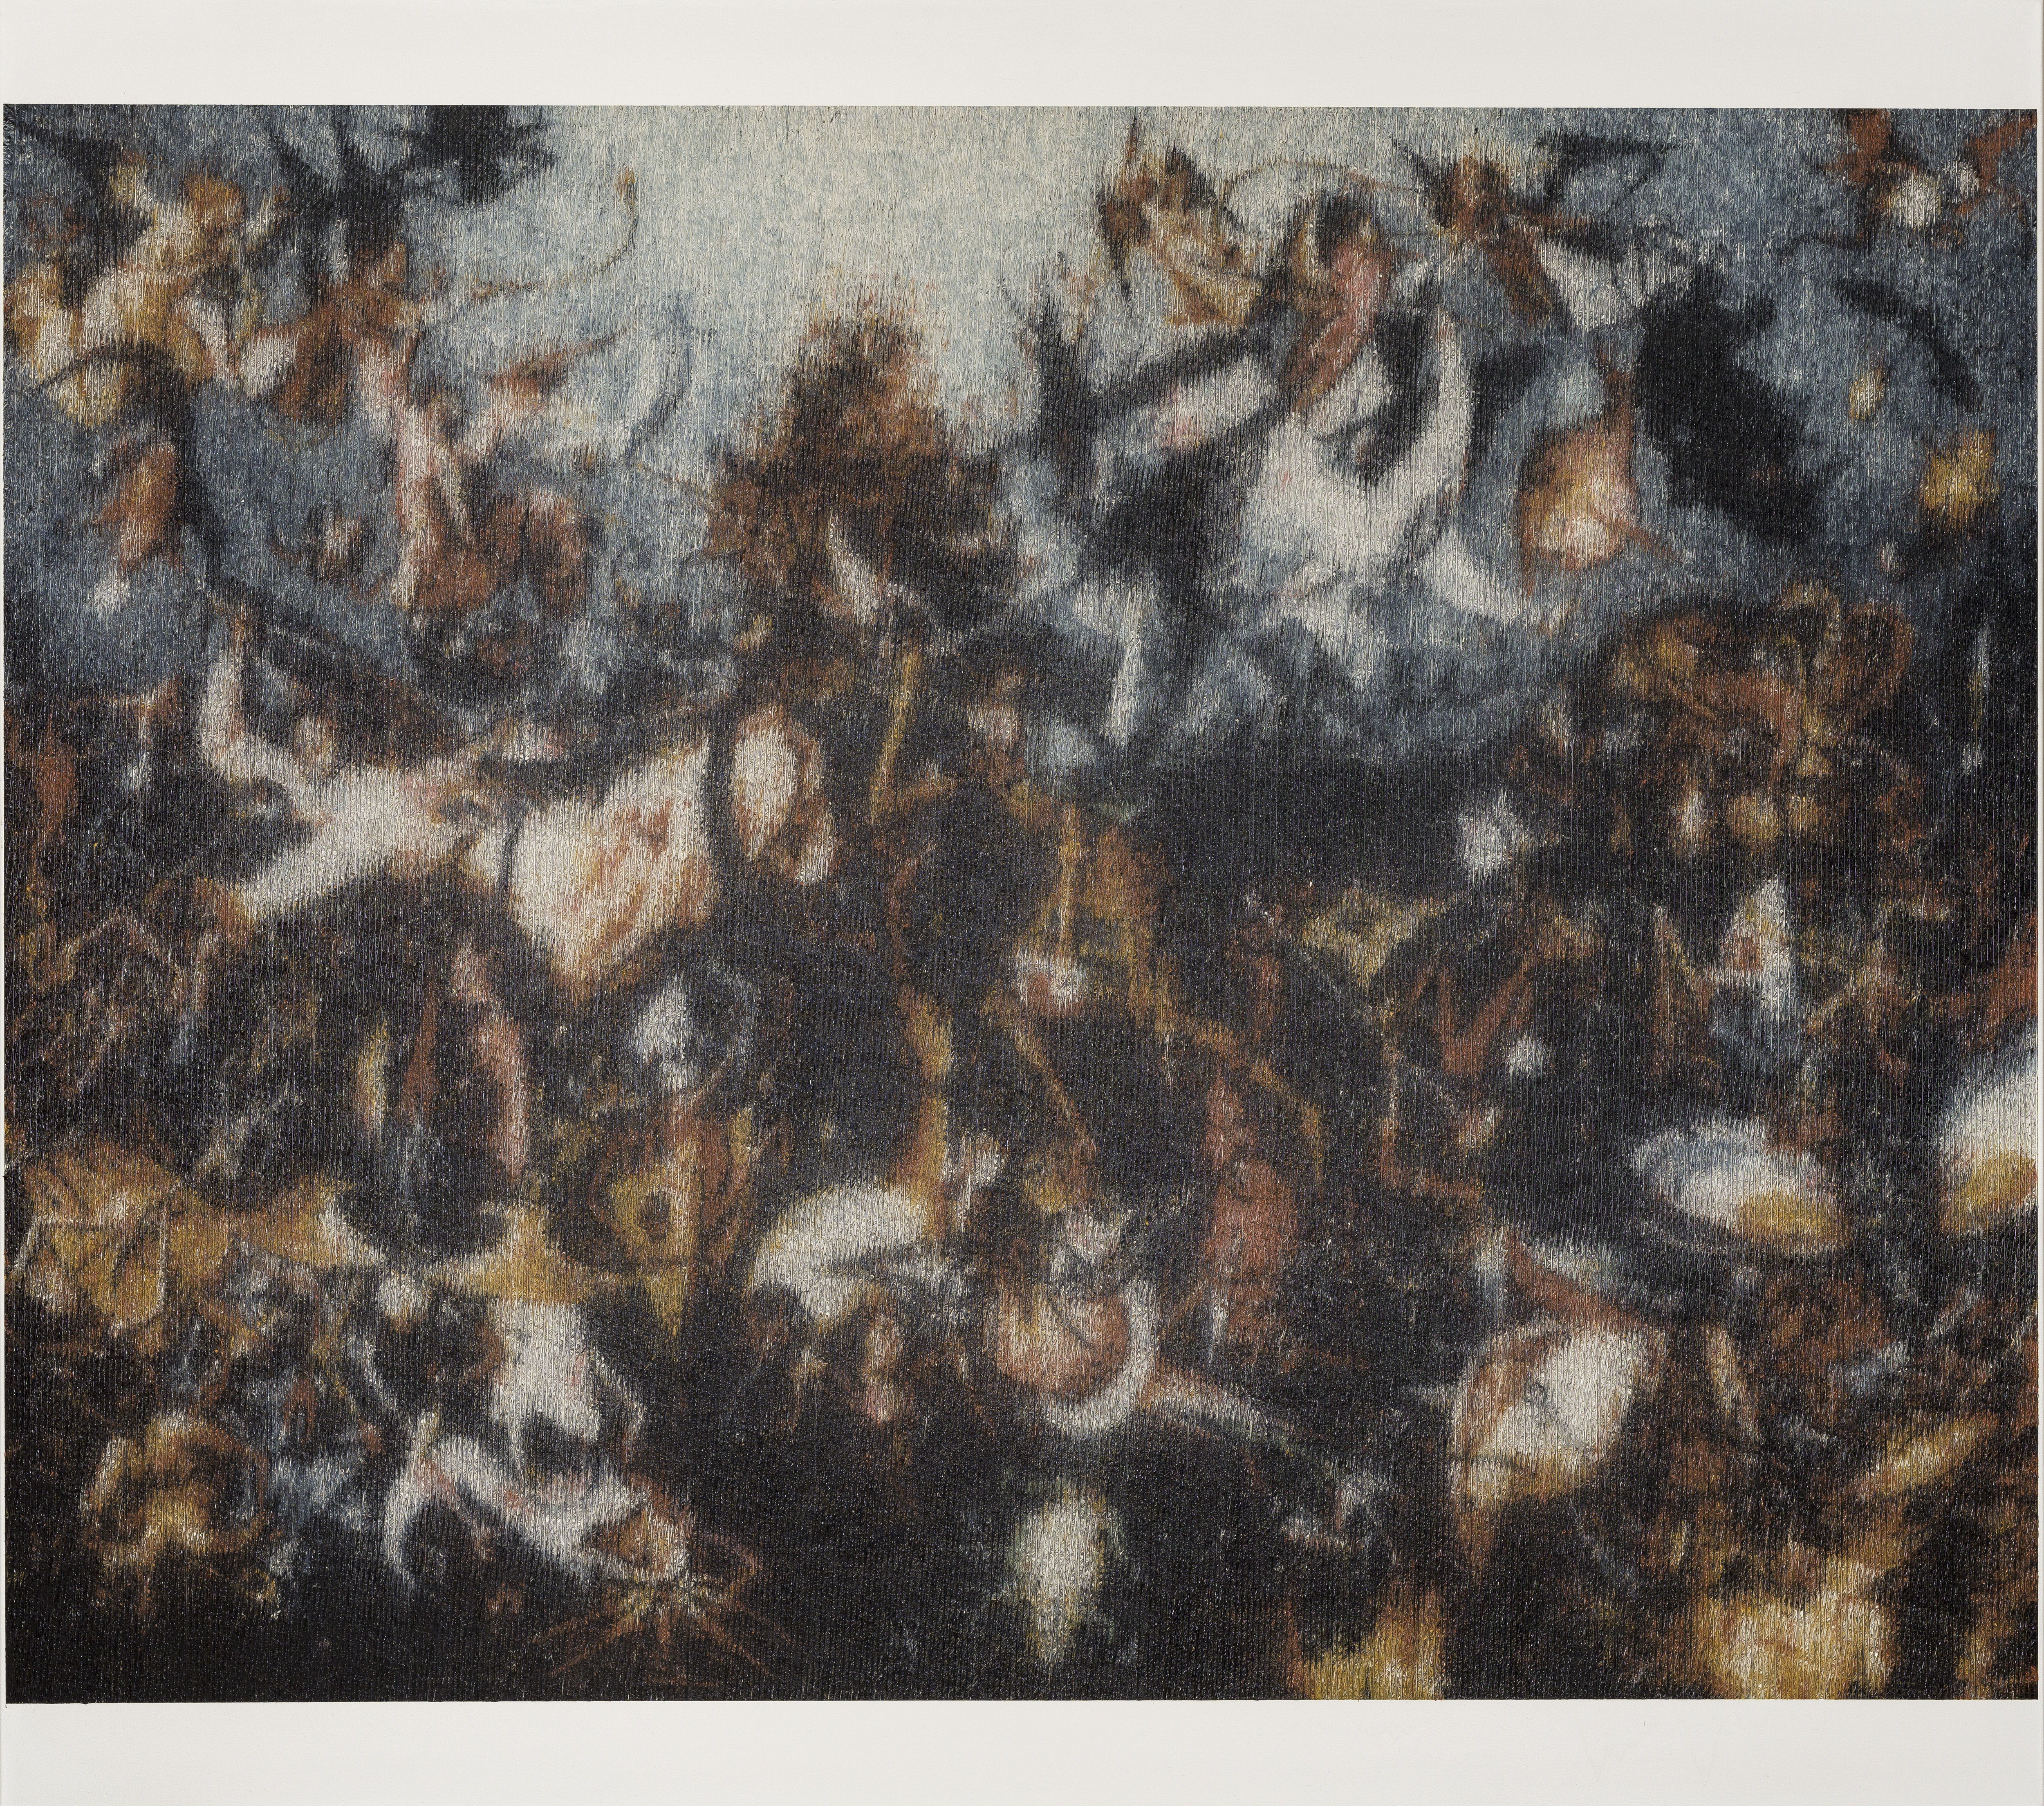 Reproduction of Brueghel 2/3 – The Fall of the Rebel Angels